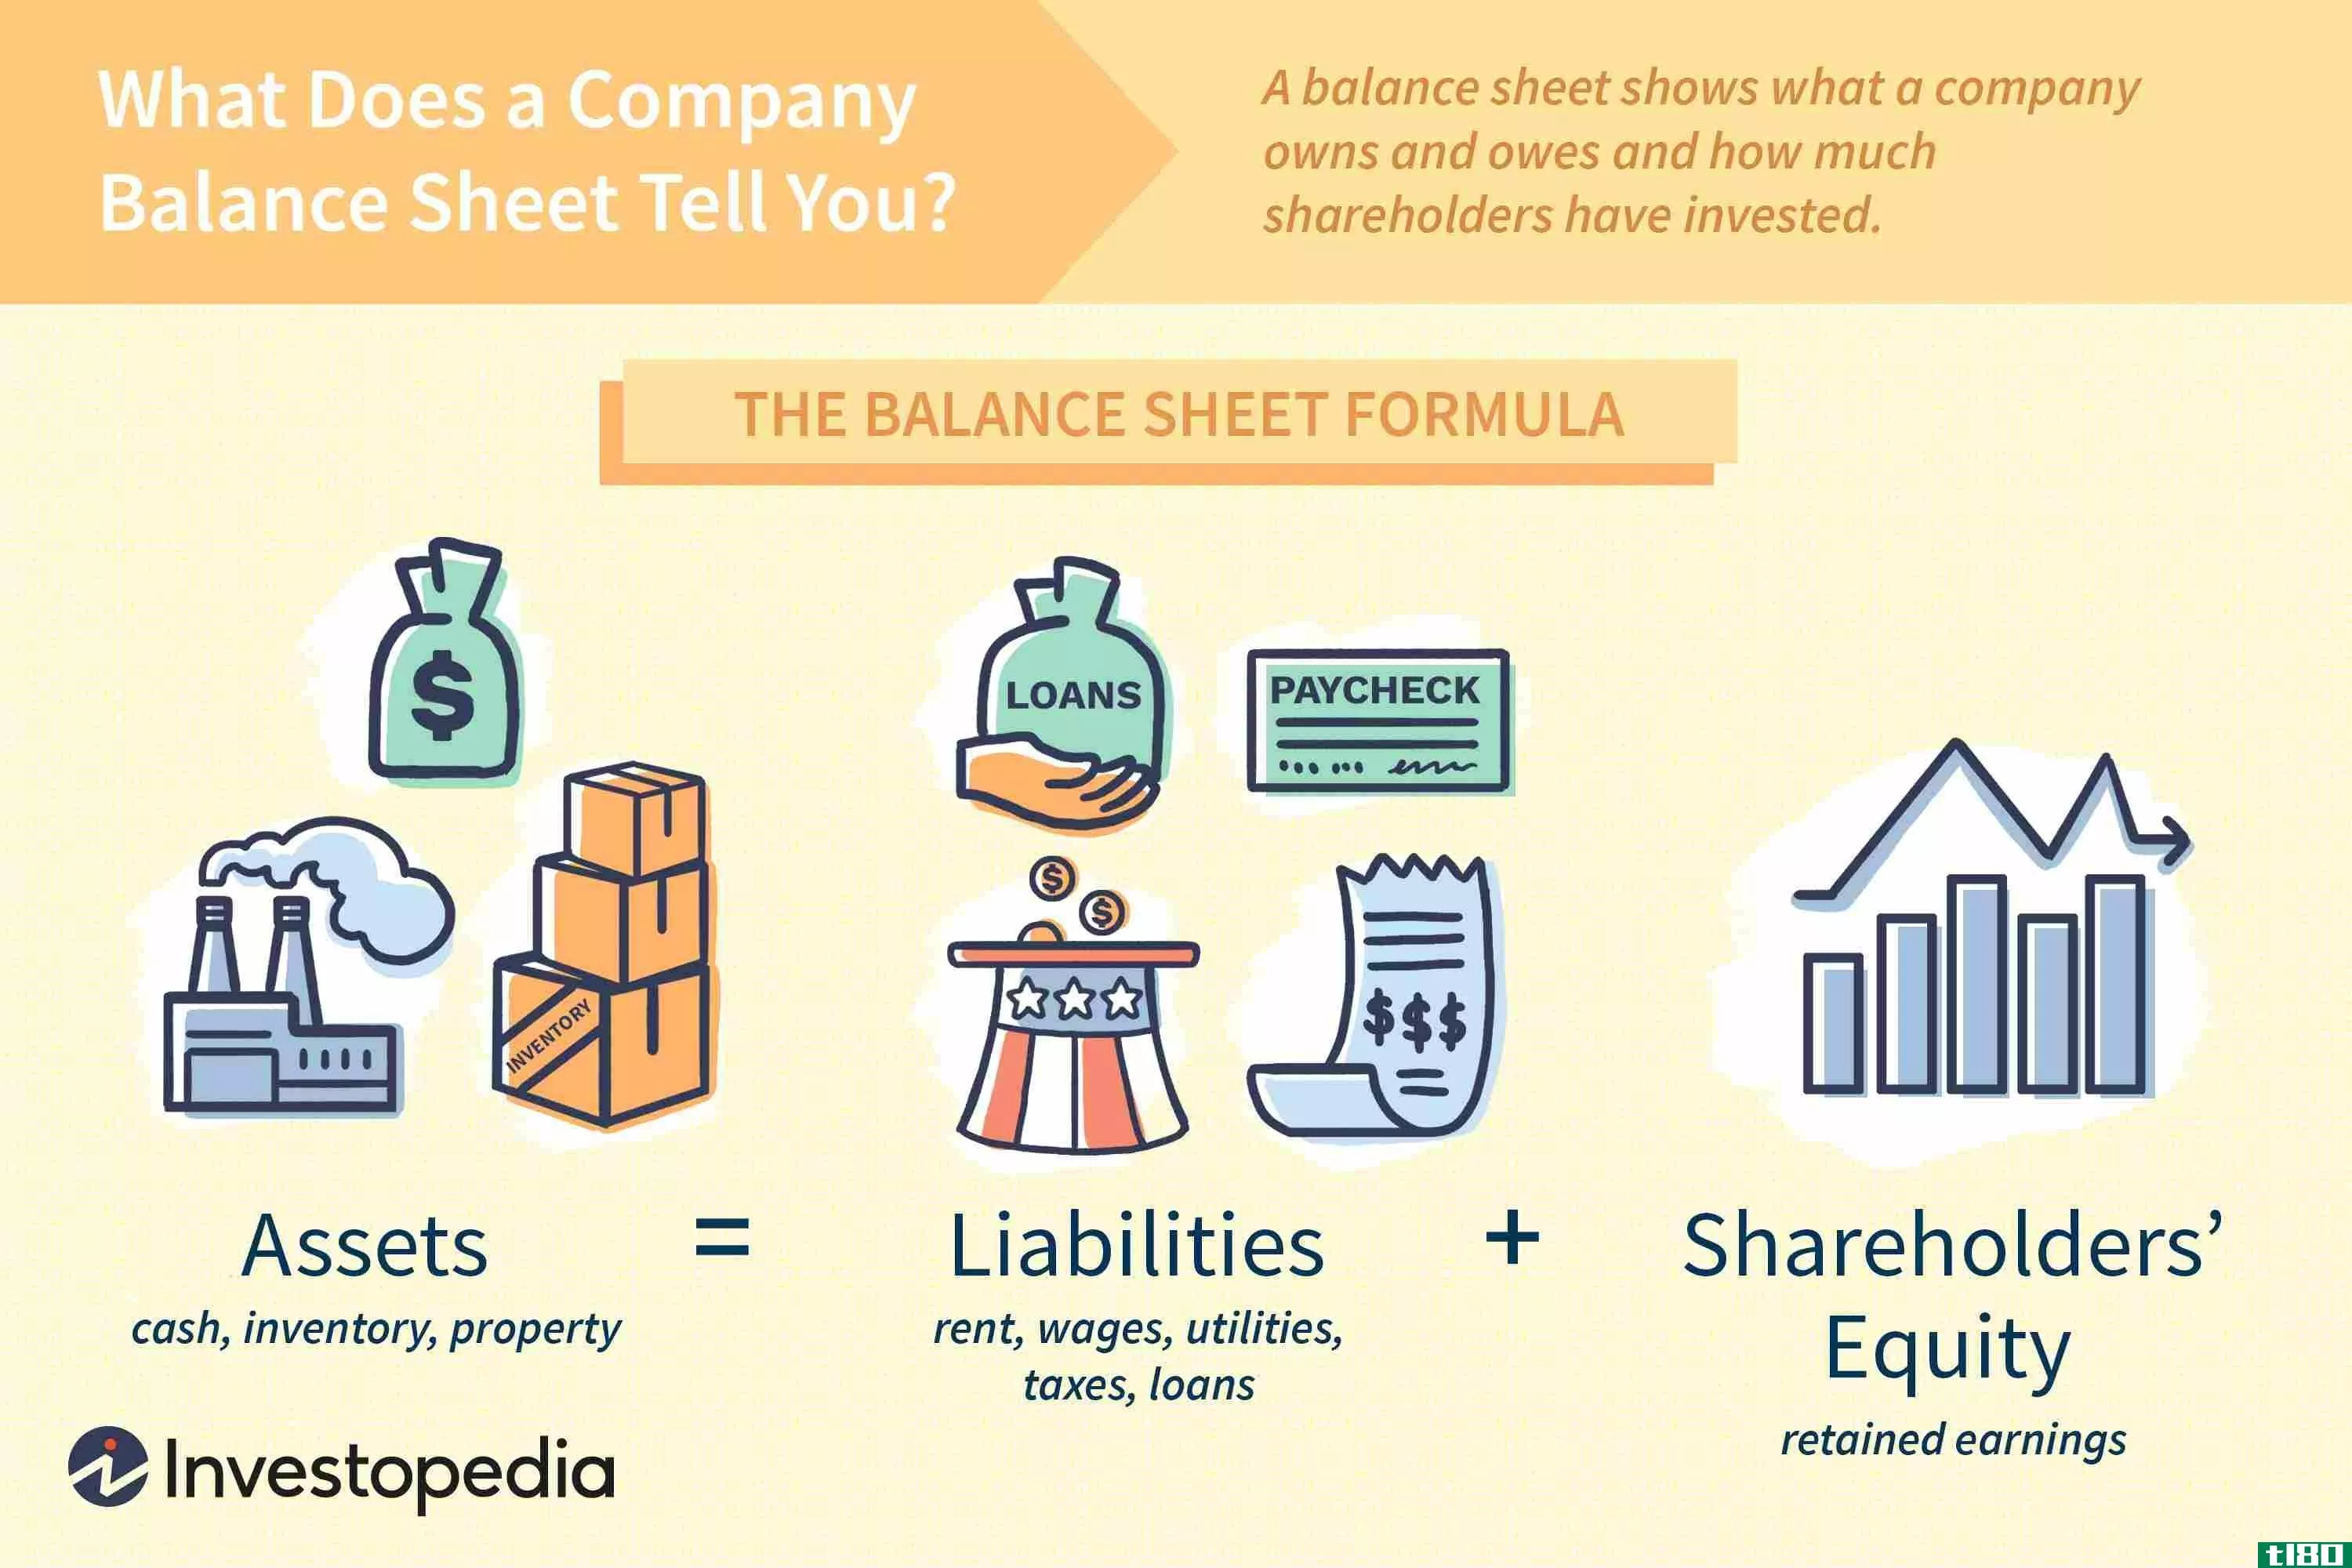 What Does a Company Balance Sheet Tell You?